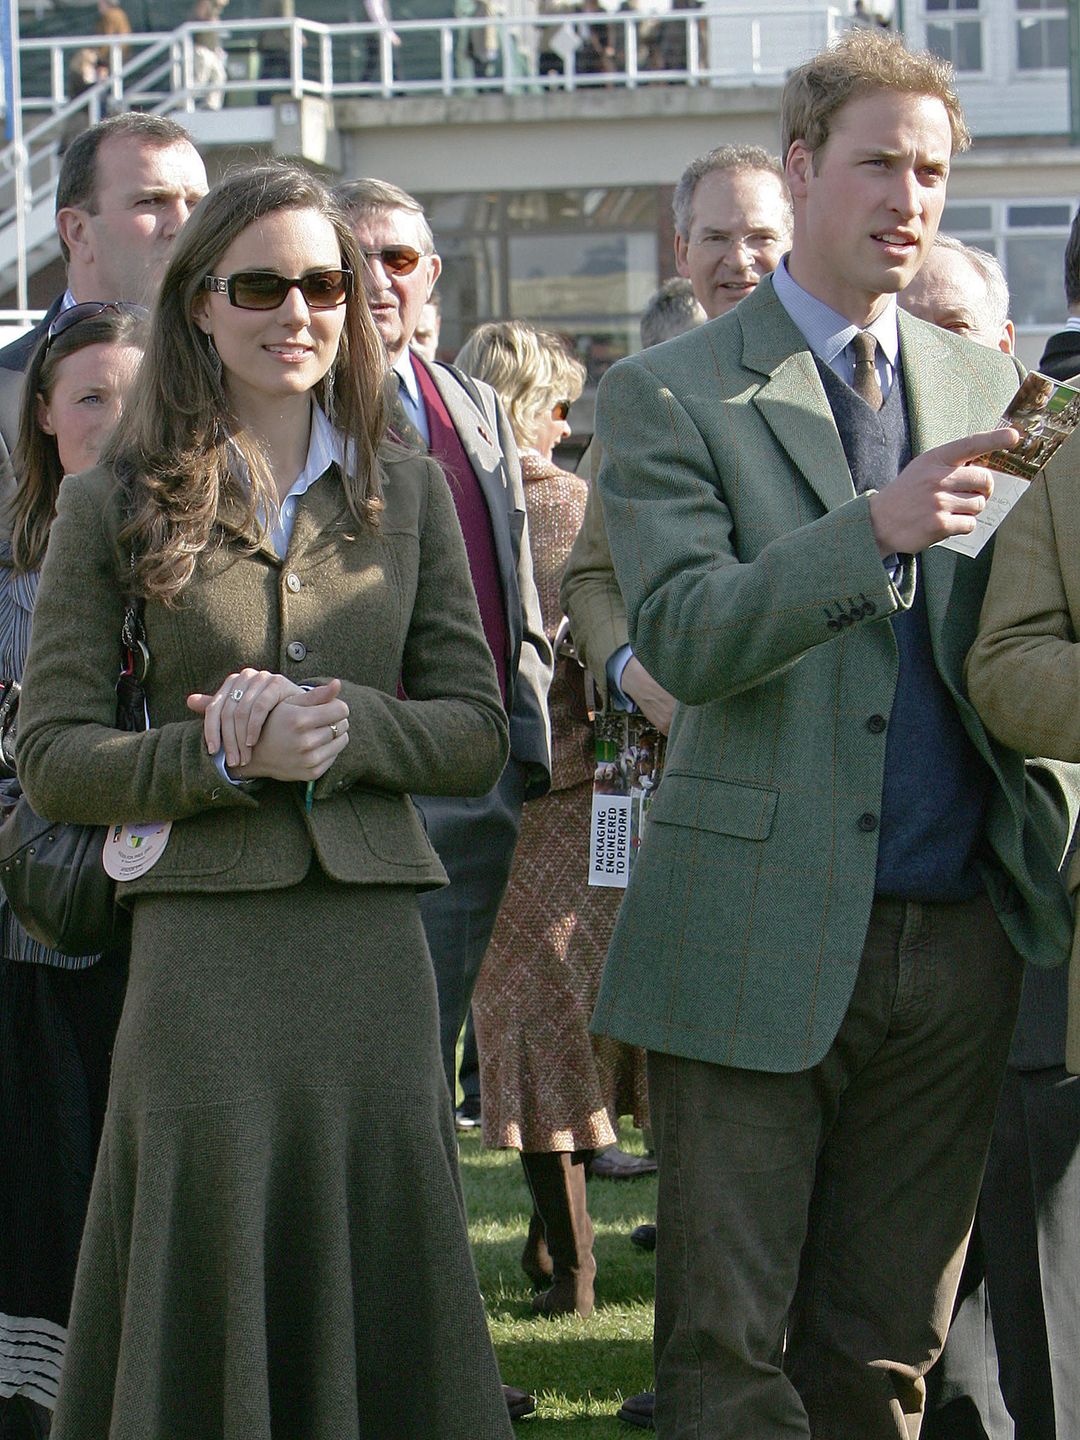 William and Kate wear matching green tweed outfit at Cheltenham 2007